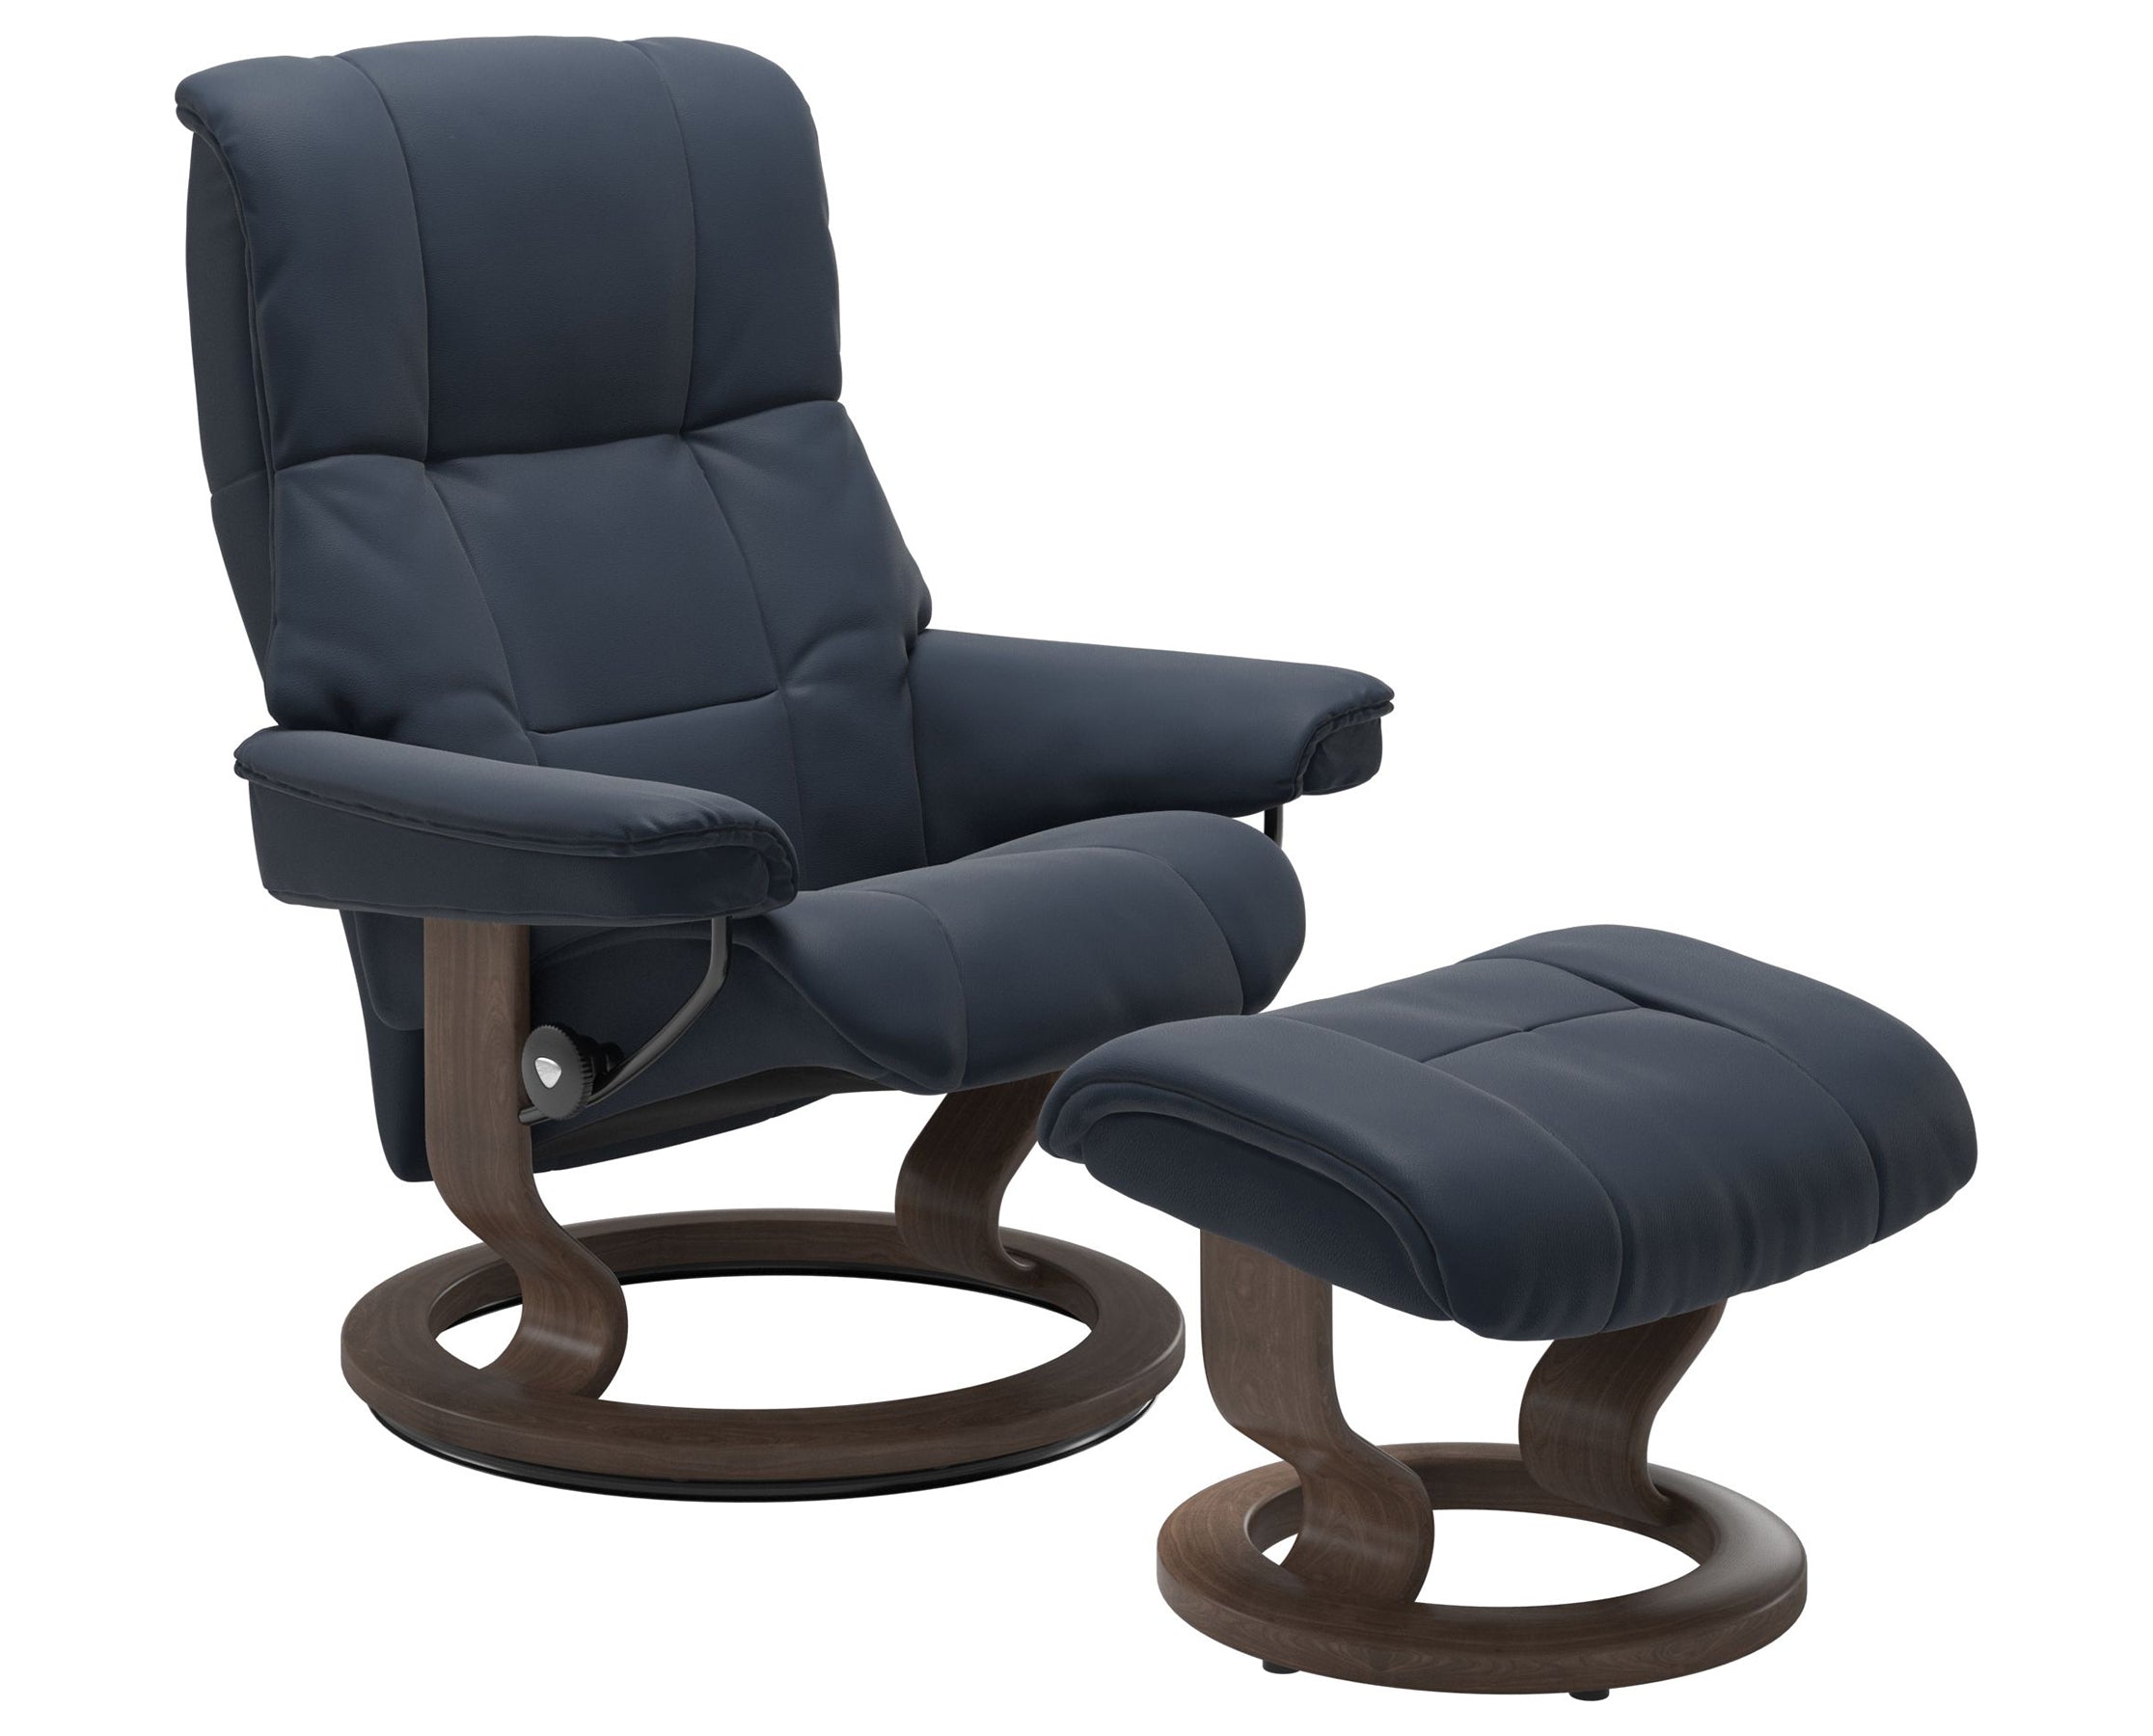 Paloma Leather Oxford Blue S/M/L and Walnut Base | Stressless Mayfair Classic Recliner | Valley Ridge Furniture